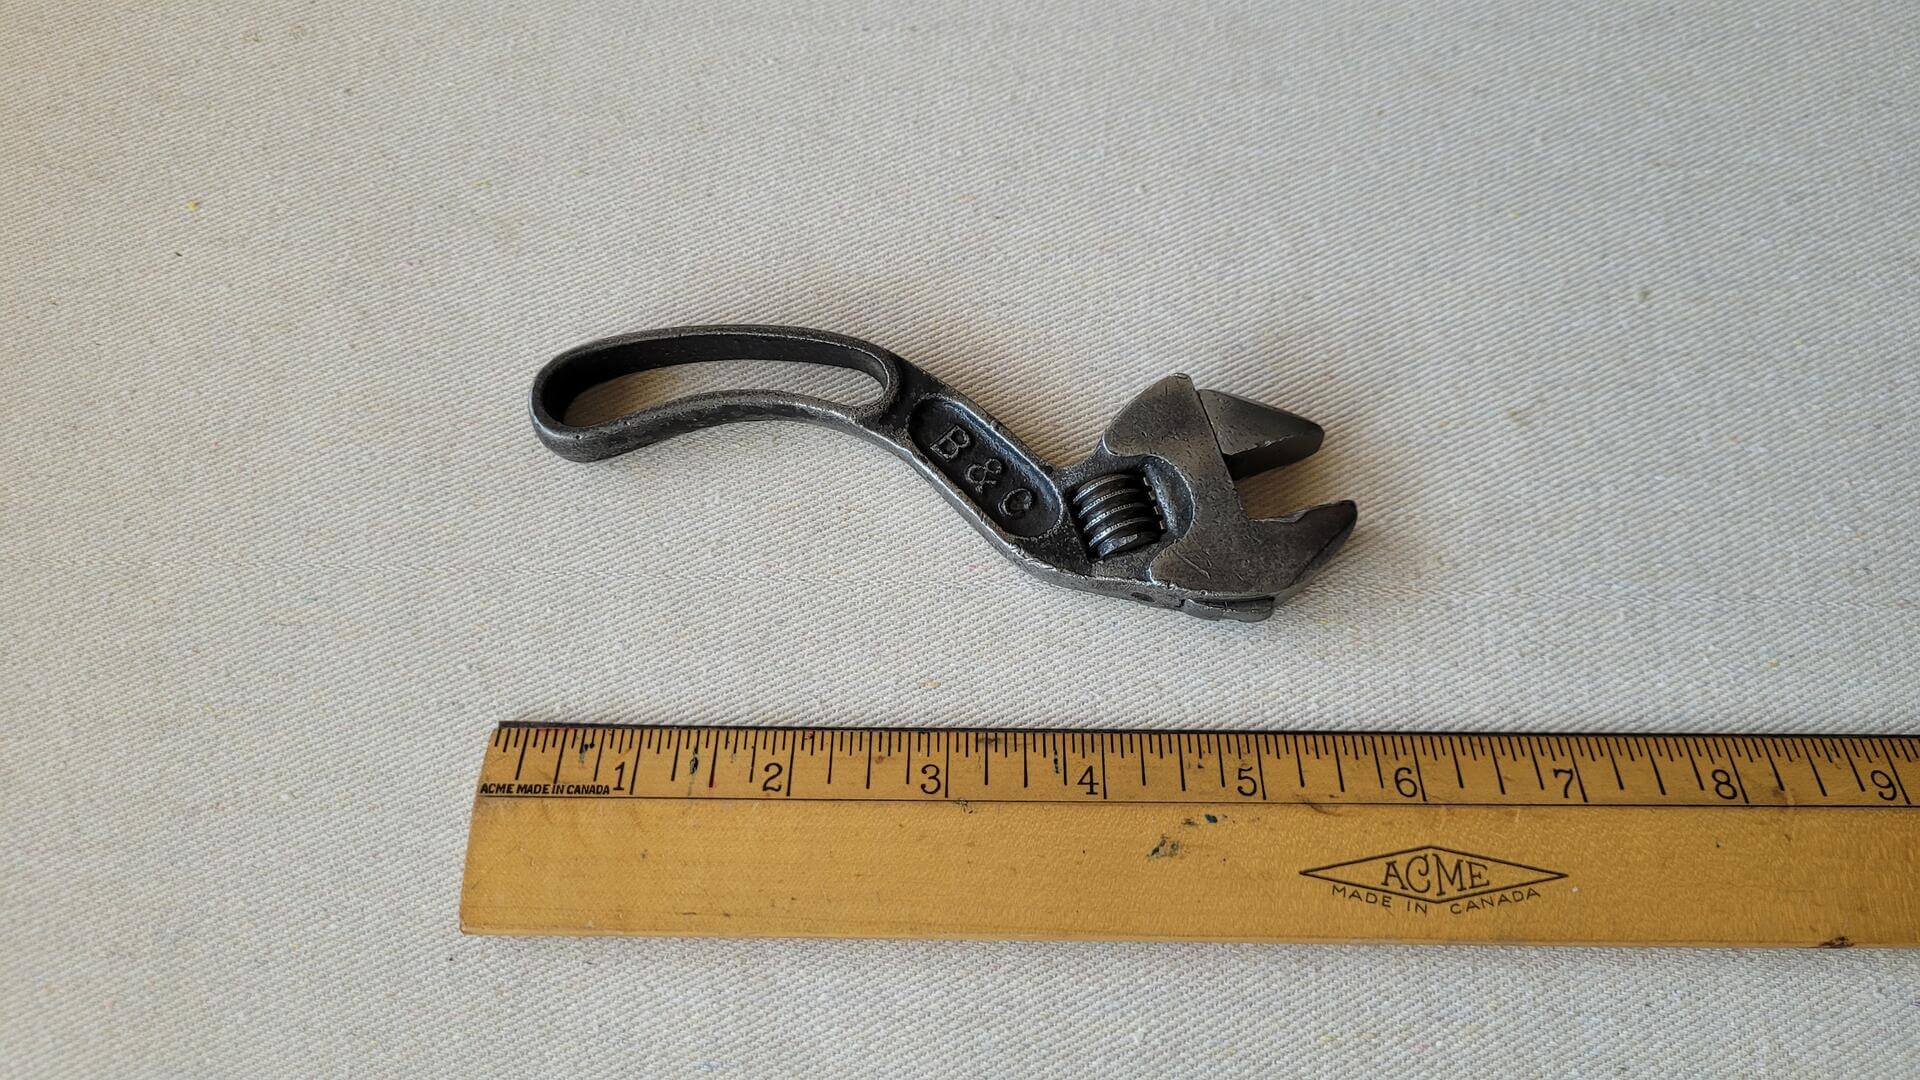 Vintage Bemis & Call Company adjustable S curved wrench 6 inches long. Vintage made in USA collectible automotive and machinist hand tools